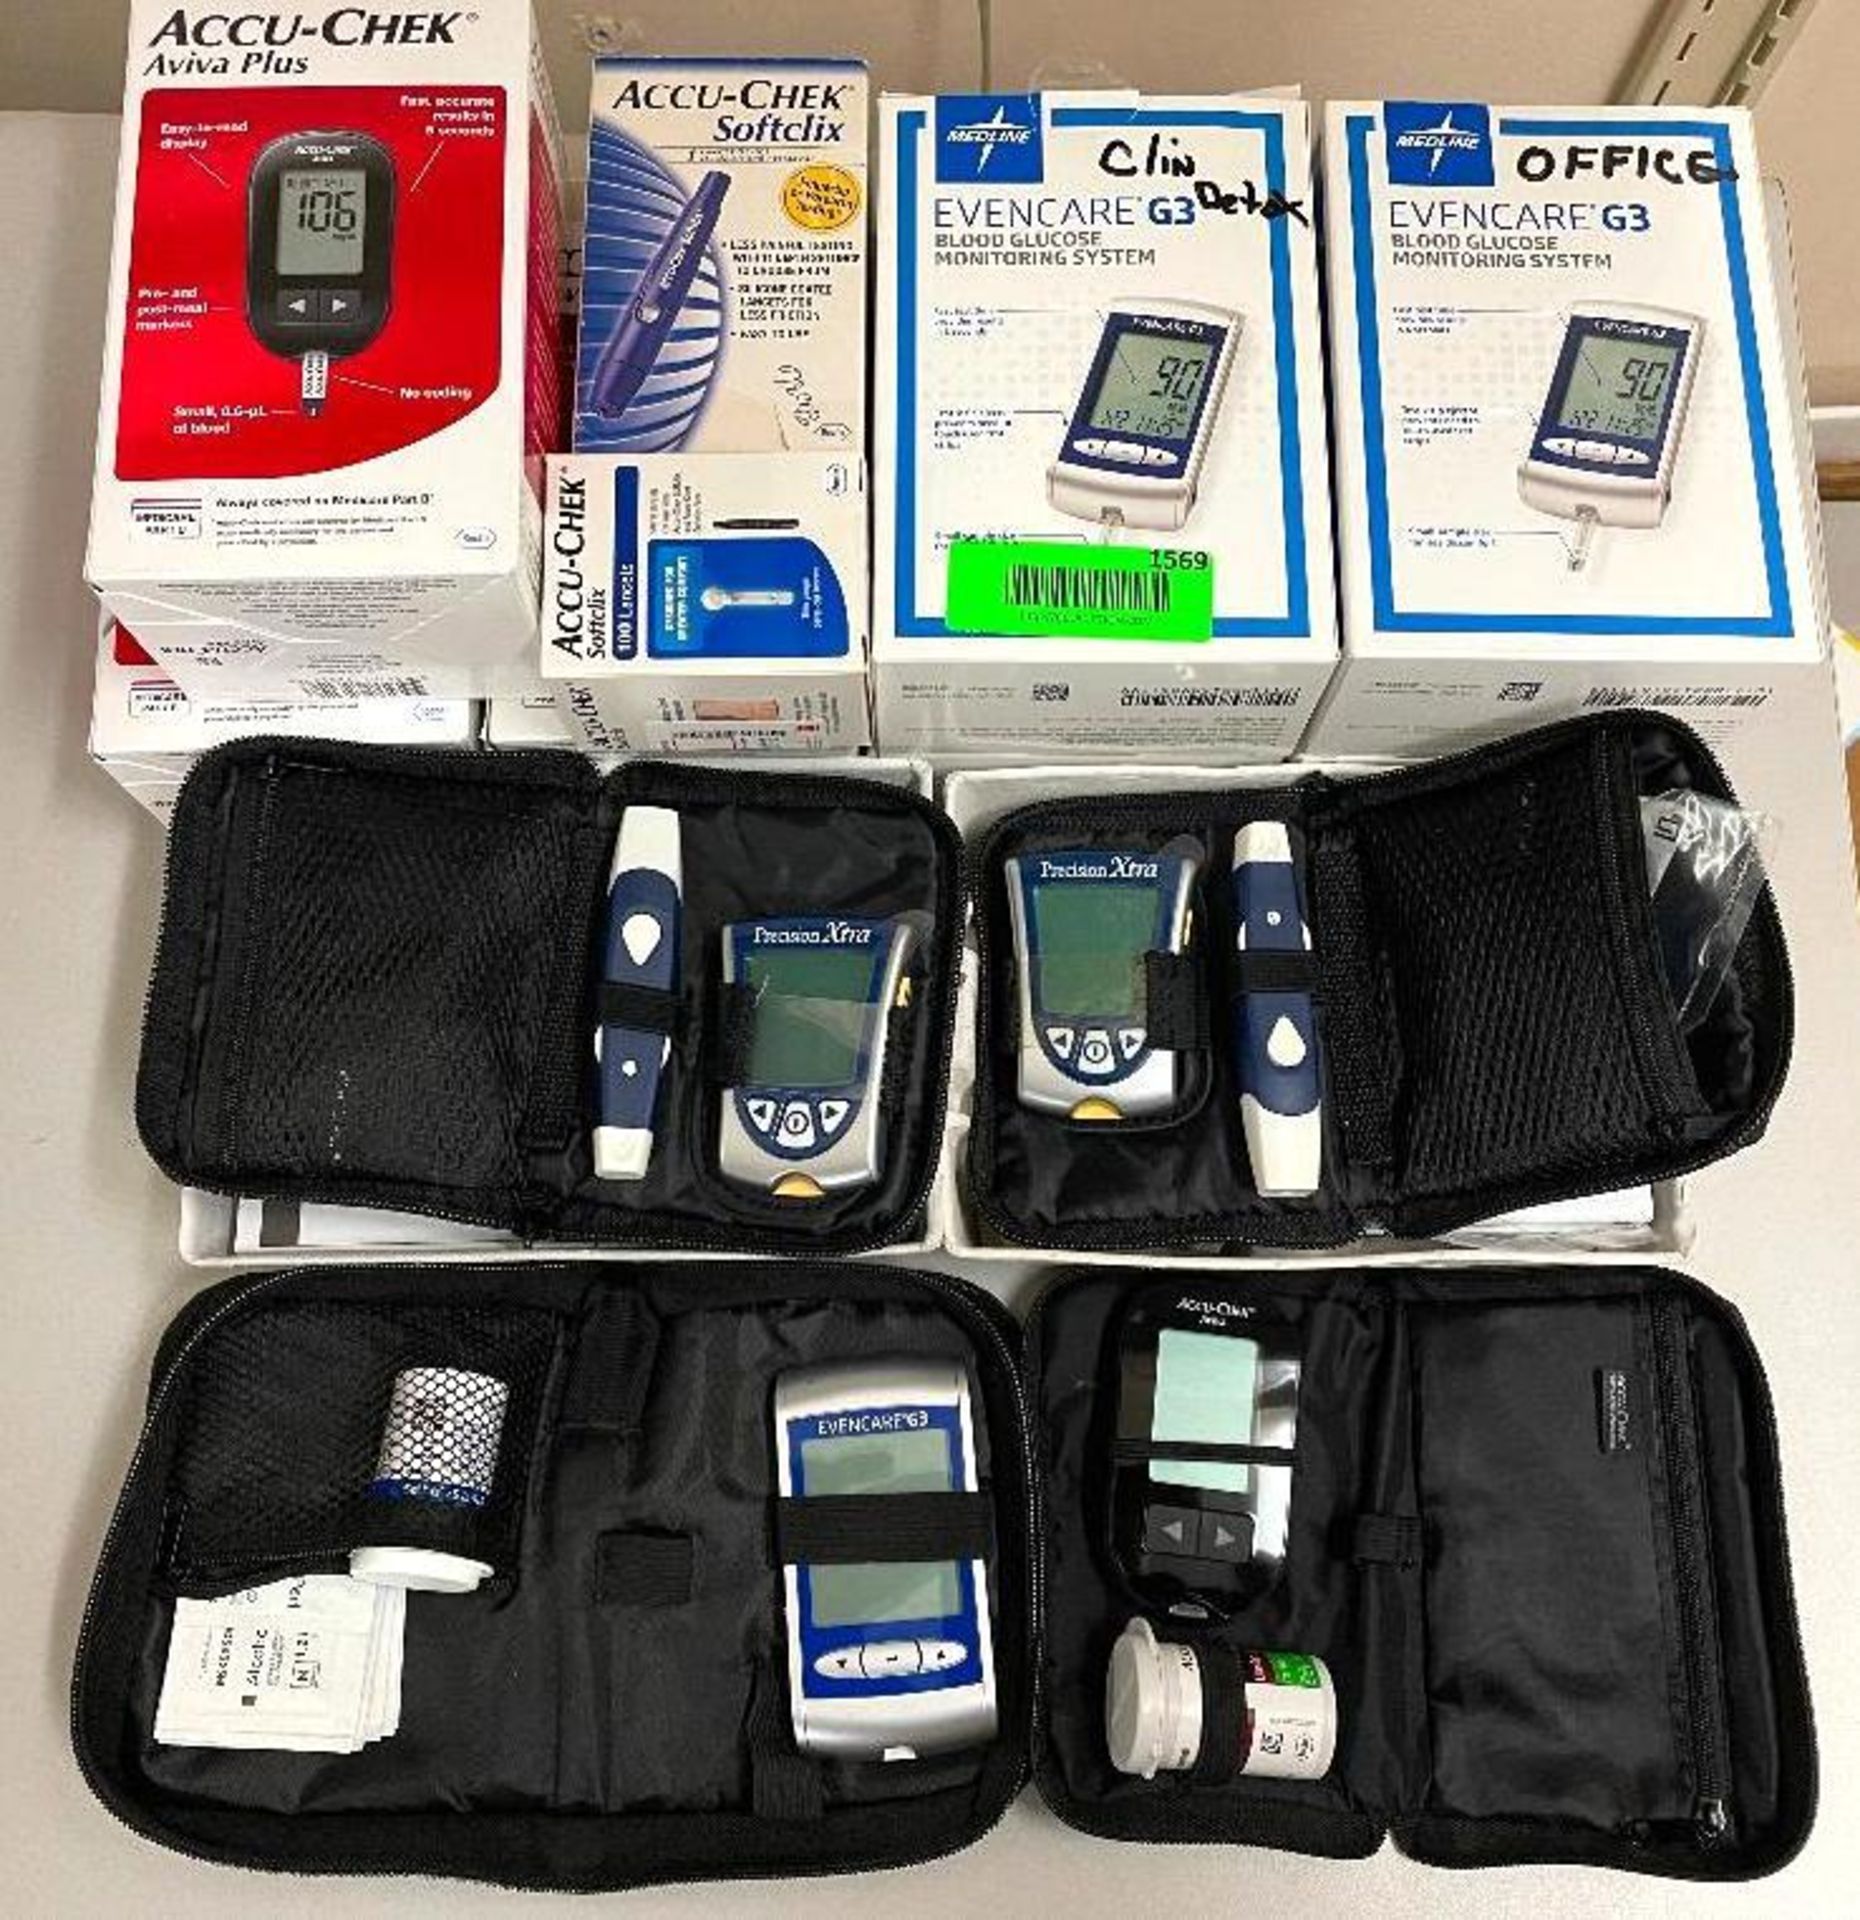 DESCRIPTION: DIABETIC / GLUCOSE MONITOR DEVICE SET ADDITIONAL INFORMATION: SEE PHOTOS. SOLD AS SET.